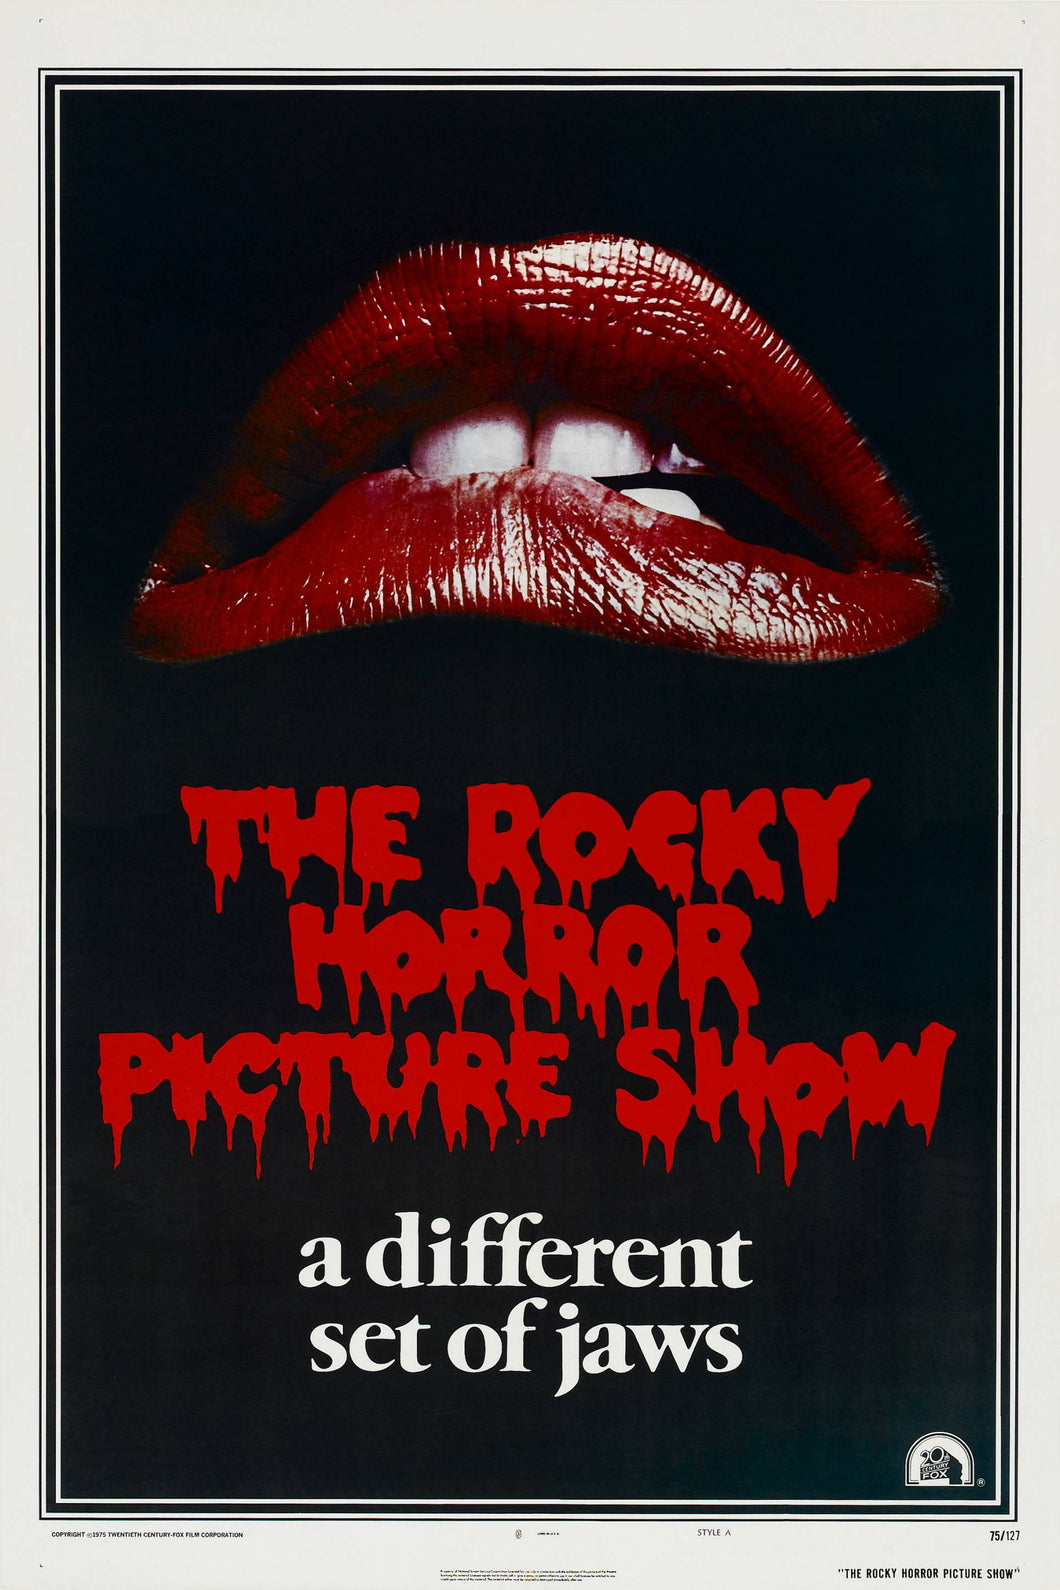 Tim Curry & Susan Sarandon dual signed The Rocky Horror Picture Show Poster Photo #4 (8x10 or 11x17) Pre-Order